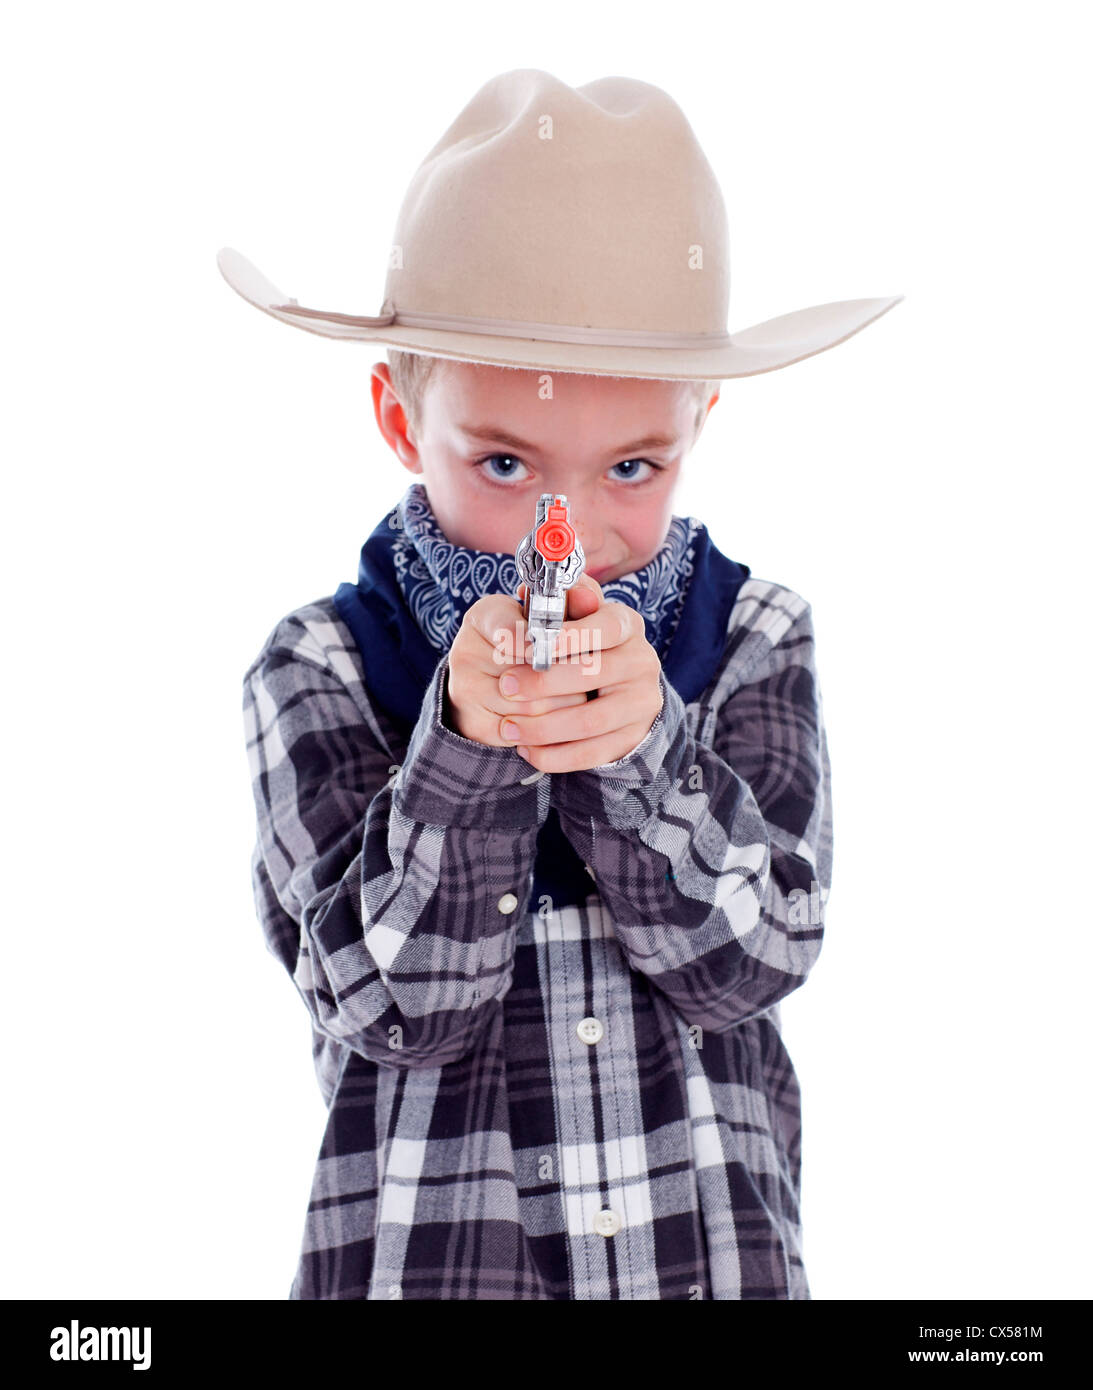 Young boy dressed as a cowboy with gun Stock Photo